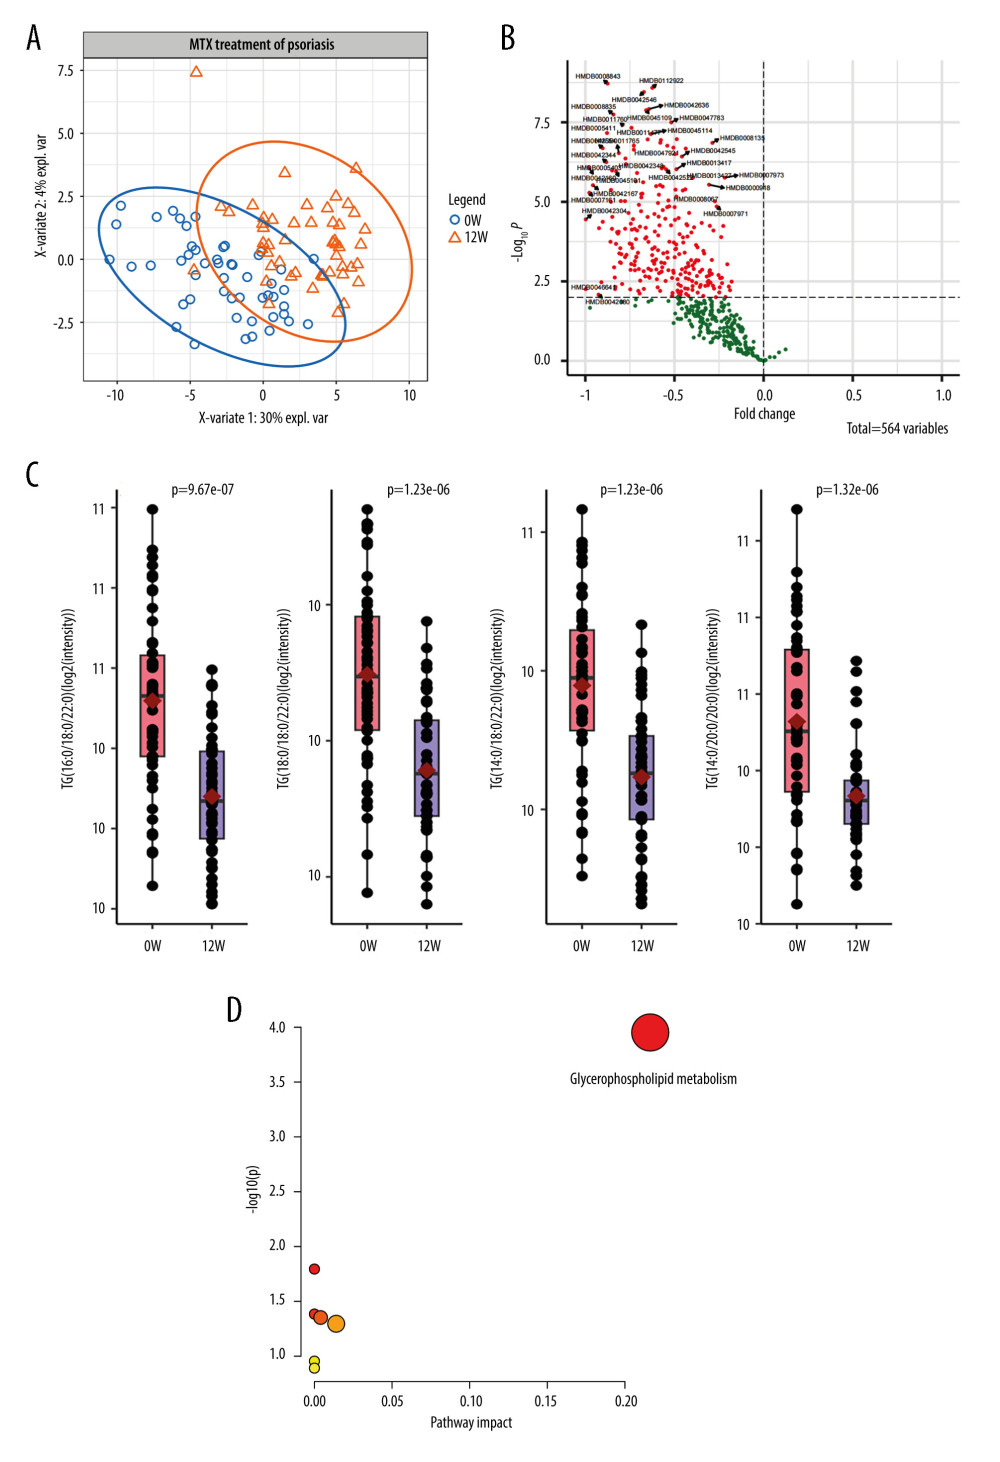 Lipid metabolic alterations in patients with psoriasis after methotrexate (MTX) treatment(A) Principal component analysis plot clearly separating samples from 0 and 12 weeks of MTX treatment in cohort 1. (B) Volcano plot showing 139 differentially expressed metabolites. (C) Three representative lipids were significantly altered after 12 weeks of MTX treatment. Each dot indicates an individual. The 1 quantile and mean and 3 quantile levels are shown in the boxplot. (D) Metabolic pathways showed that the differentially expressed lipids are prominent in the glycerophospholipid pathway. (Figures were generated by R with ggplot2_3.4.2, EnhancedVolcano_1.16.0. The metabolic pathways analysis was based on MetaboAnalyst 6.0.).